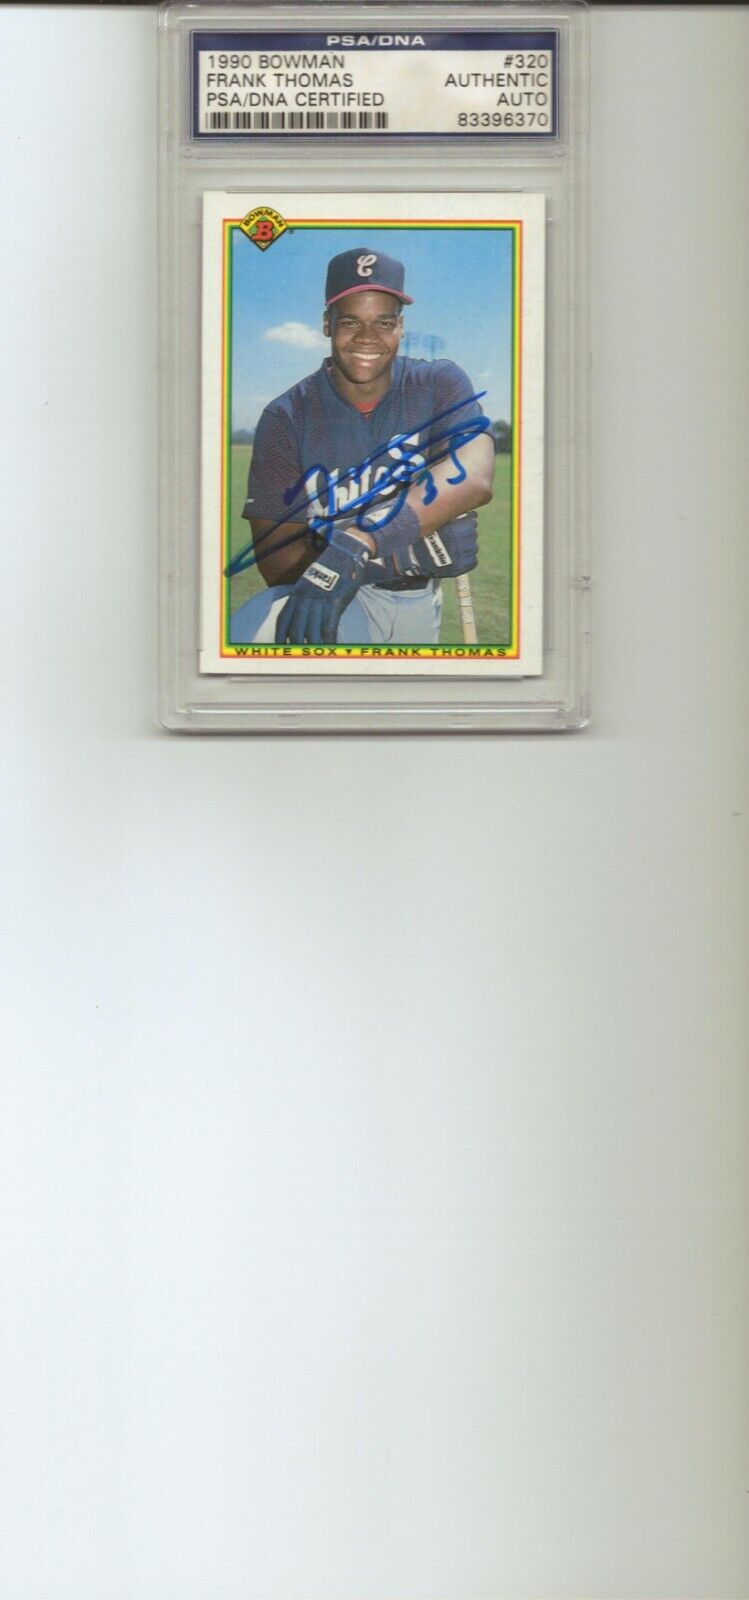 1990 BOWMAN FRANK THOMAS ROOKIE CARD AUTOGRAPHED PSA/DNA CERTIFIED 